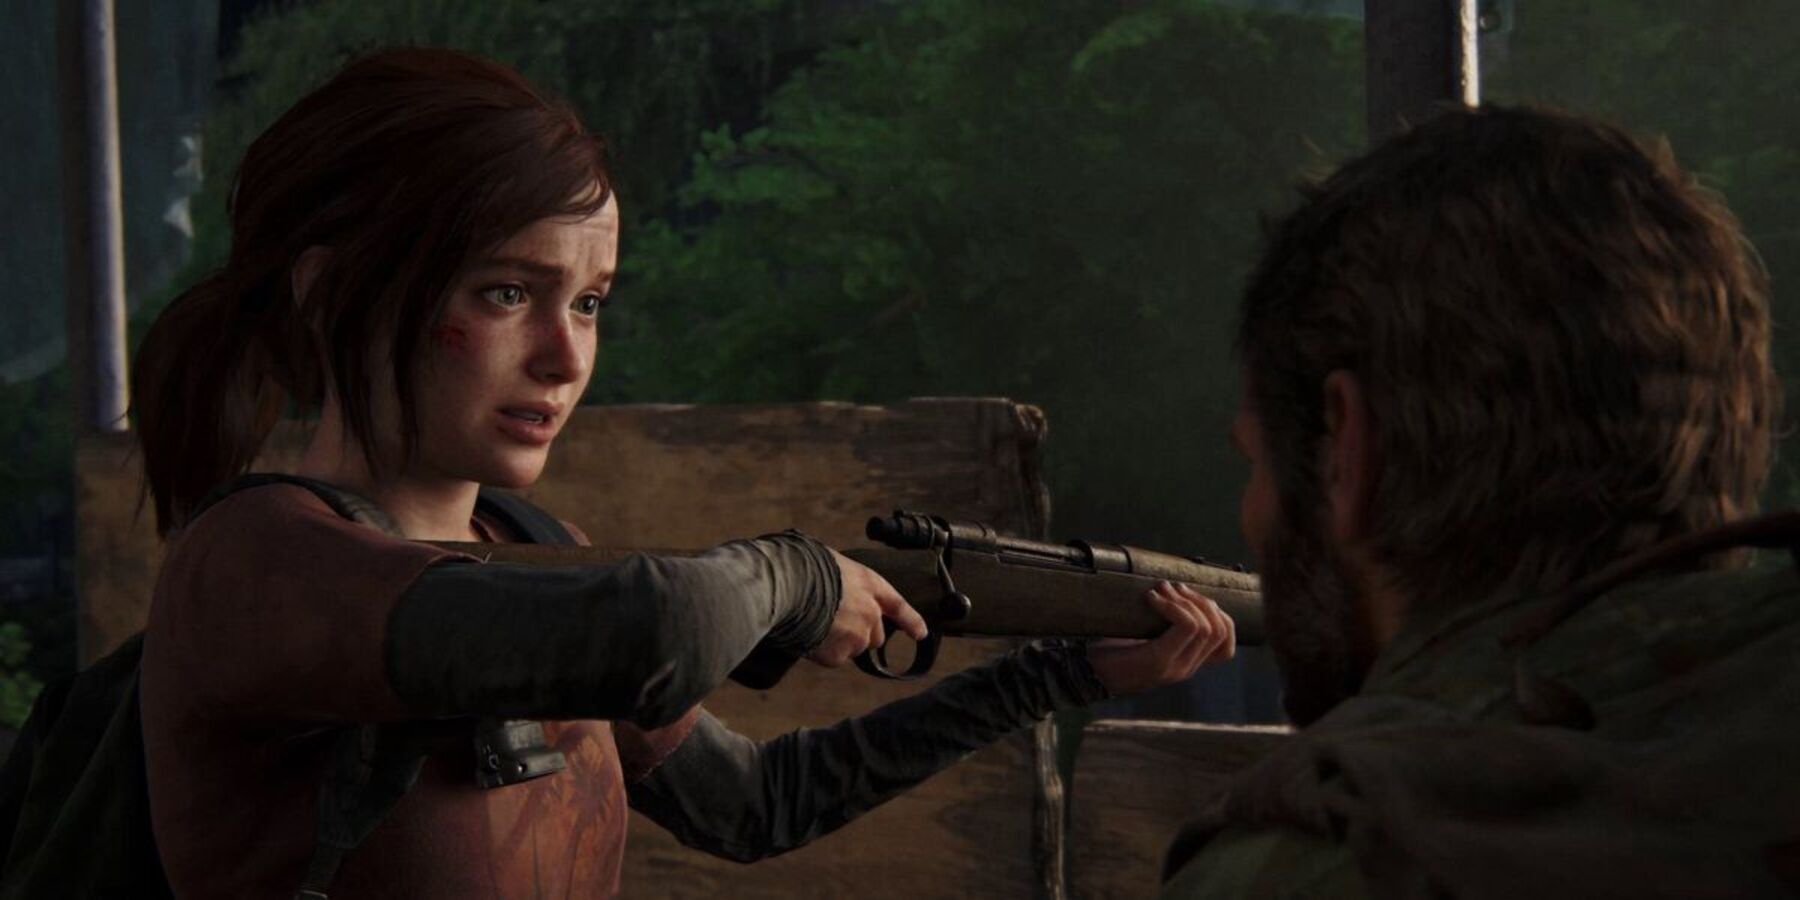 HBO’s “The Last of Us” Will Recreate Cut Scenes from the First Game